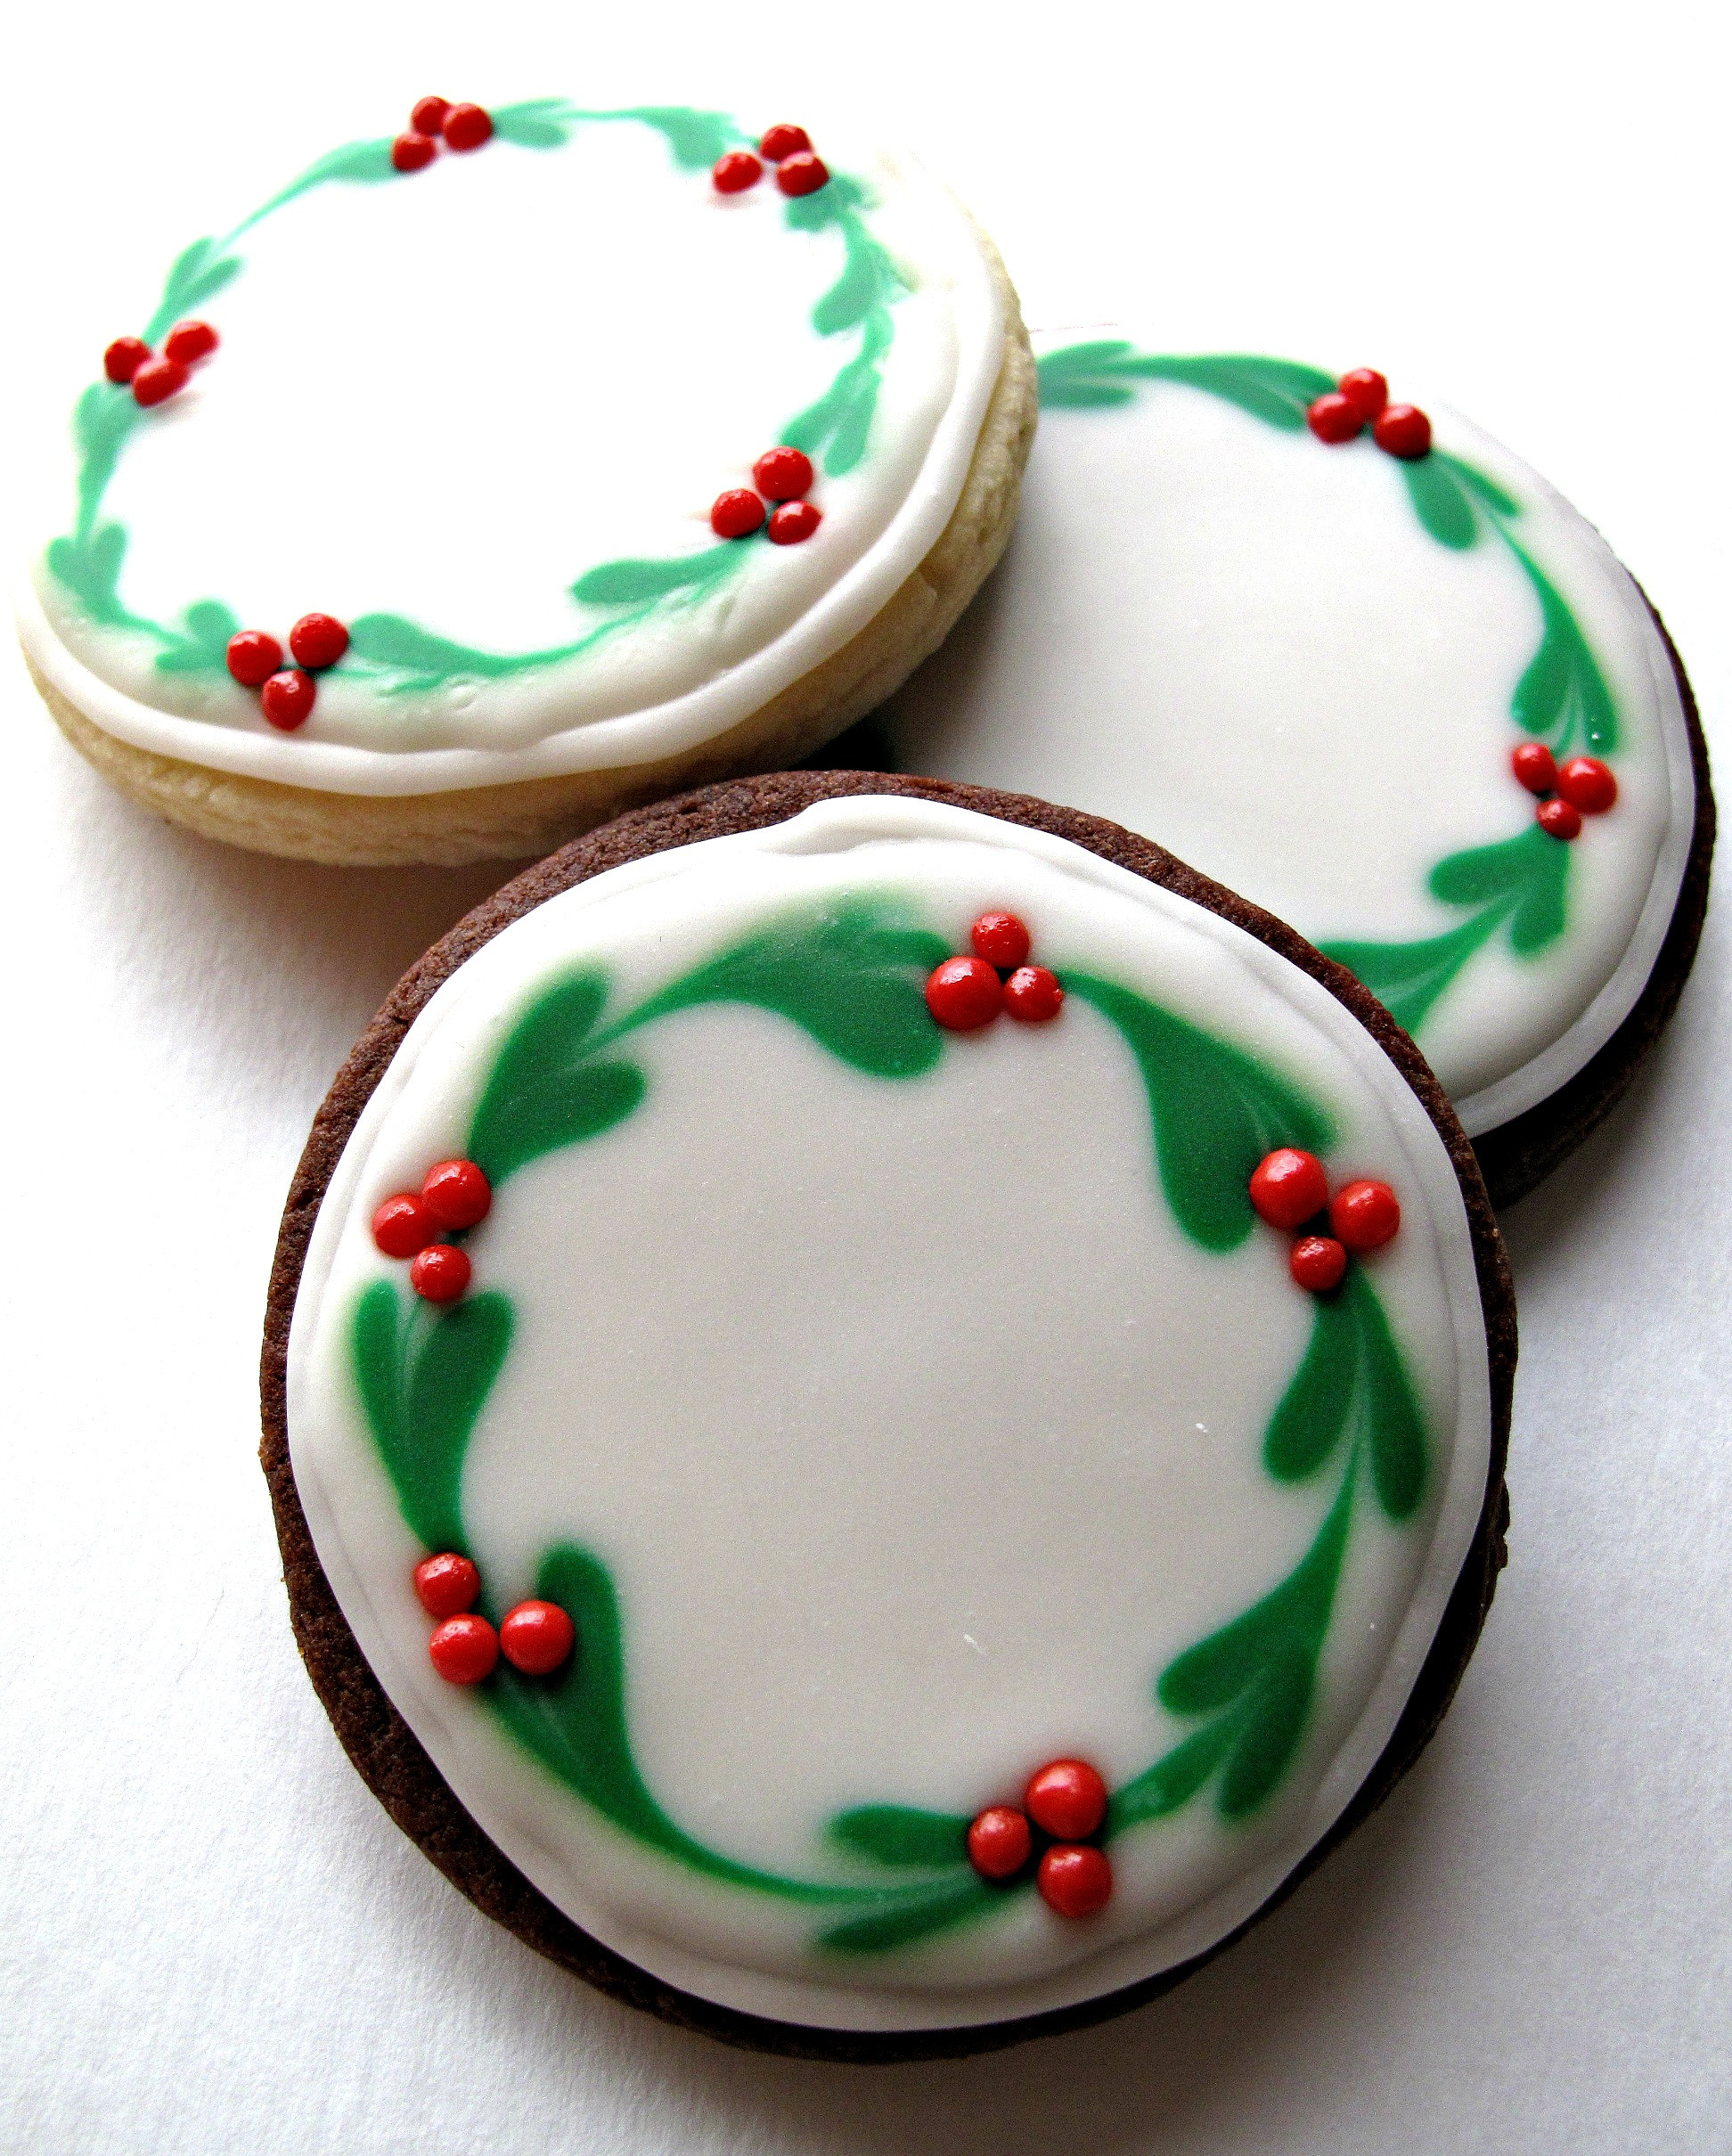 Christmas Cookie Icing Ideas
 Chocolate Covered Oreos and Iced Christmas Sugar Cookies